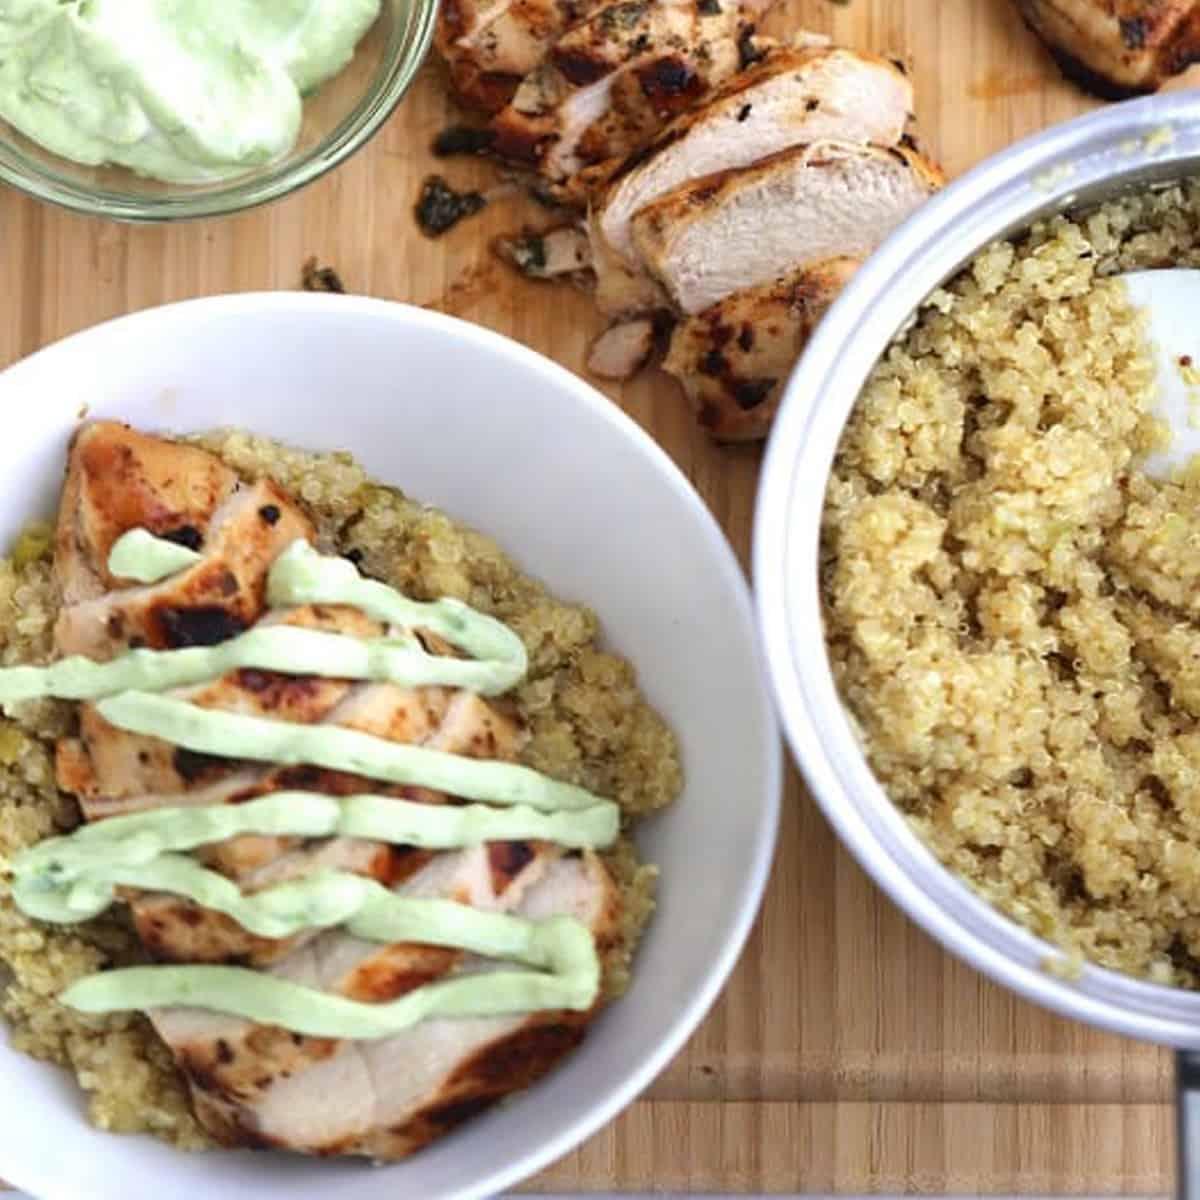 grilled cilantro lime chicken with quinoa, An incredibly juicy and falvorful Cilantro Lime Chicken on a bed of the most delicious Quinoa!